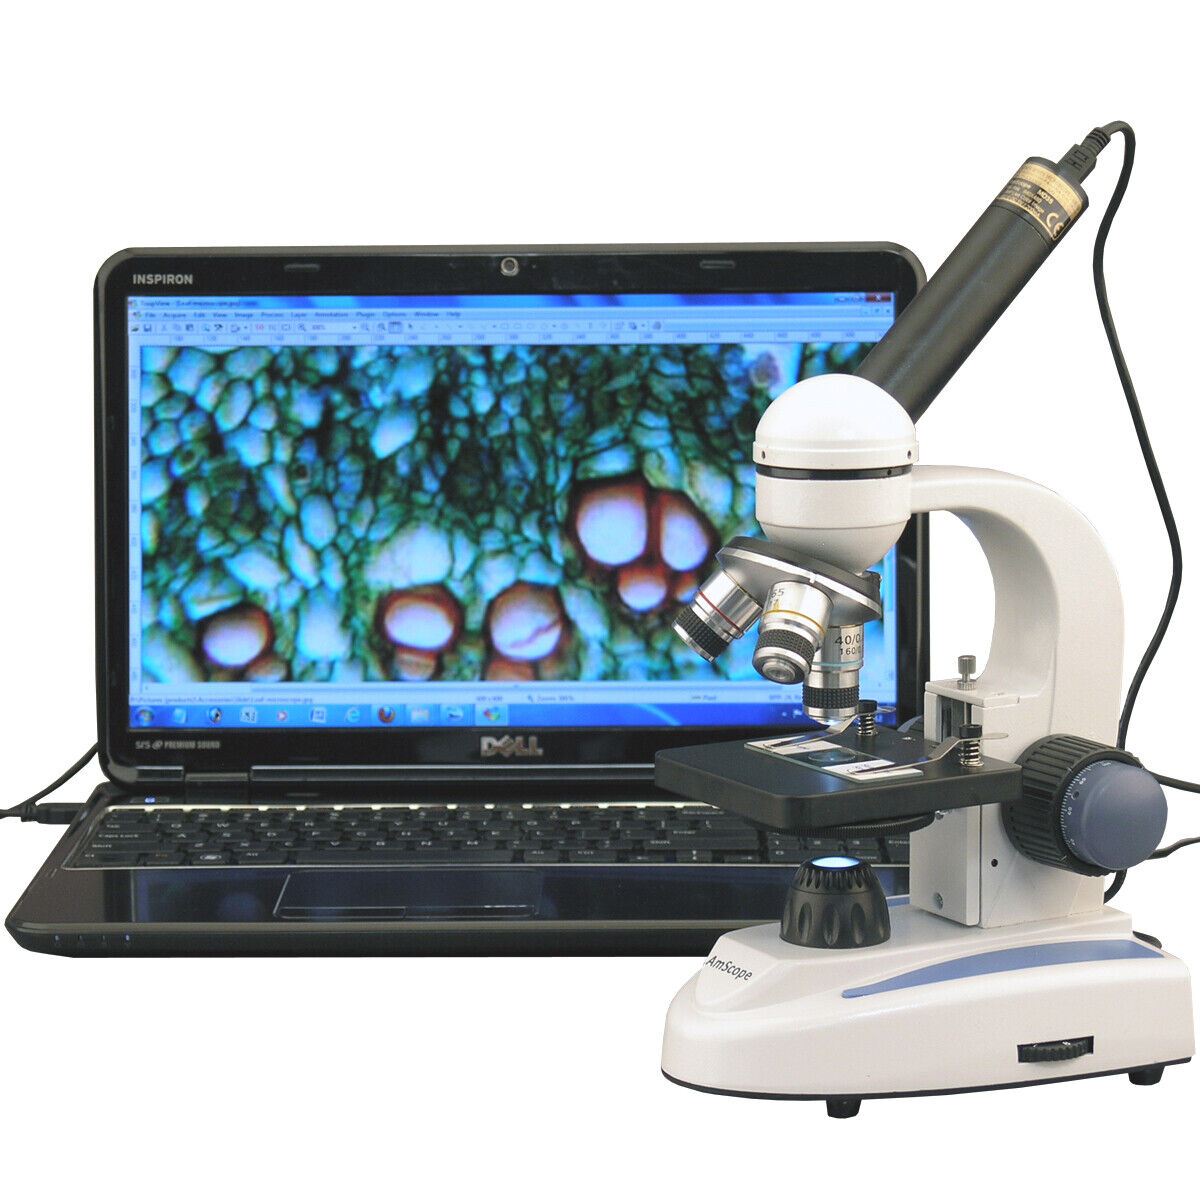 AmScope 40X-400X Student Microscope + 2MP USB Digital Imagery for Lab & Science